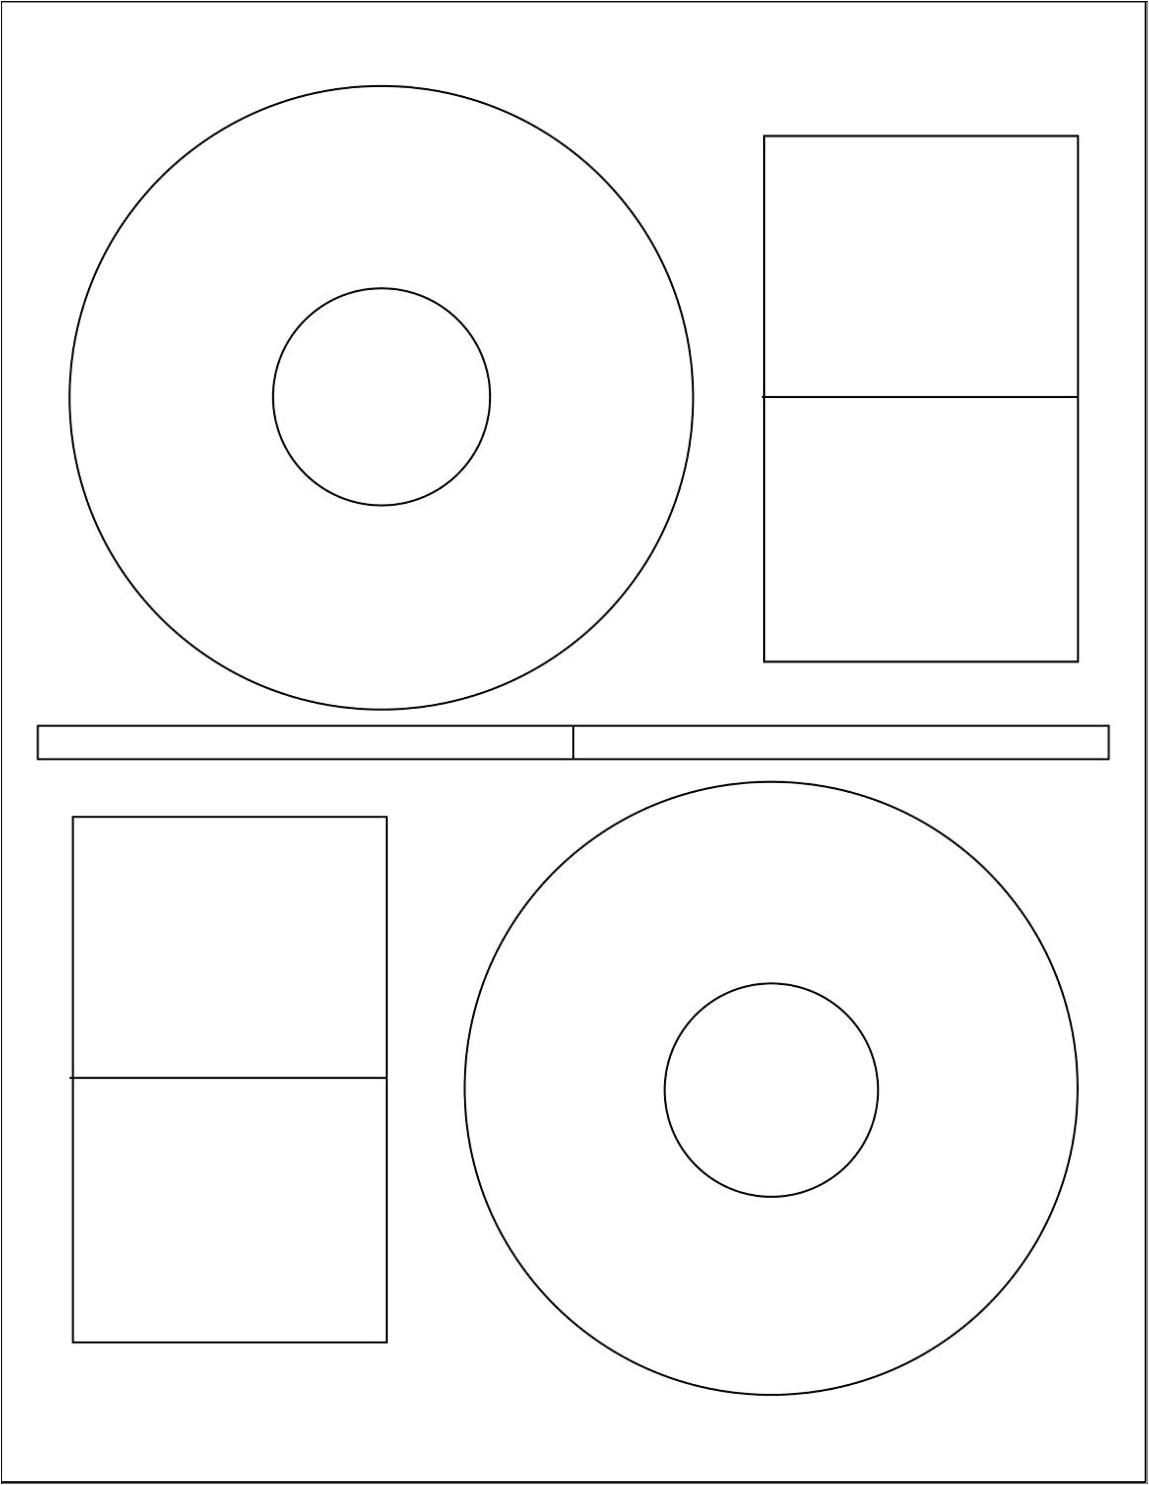 Cd Stomper 2 Up Standard With Center Labels Template | Williamson-Ga throughout Cd Stomper 2 Up Standard With Center Labels Template